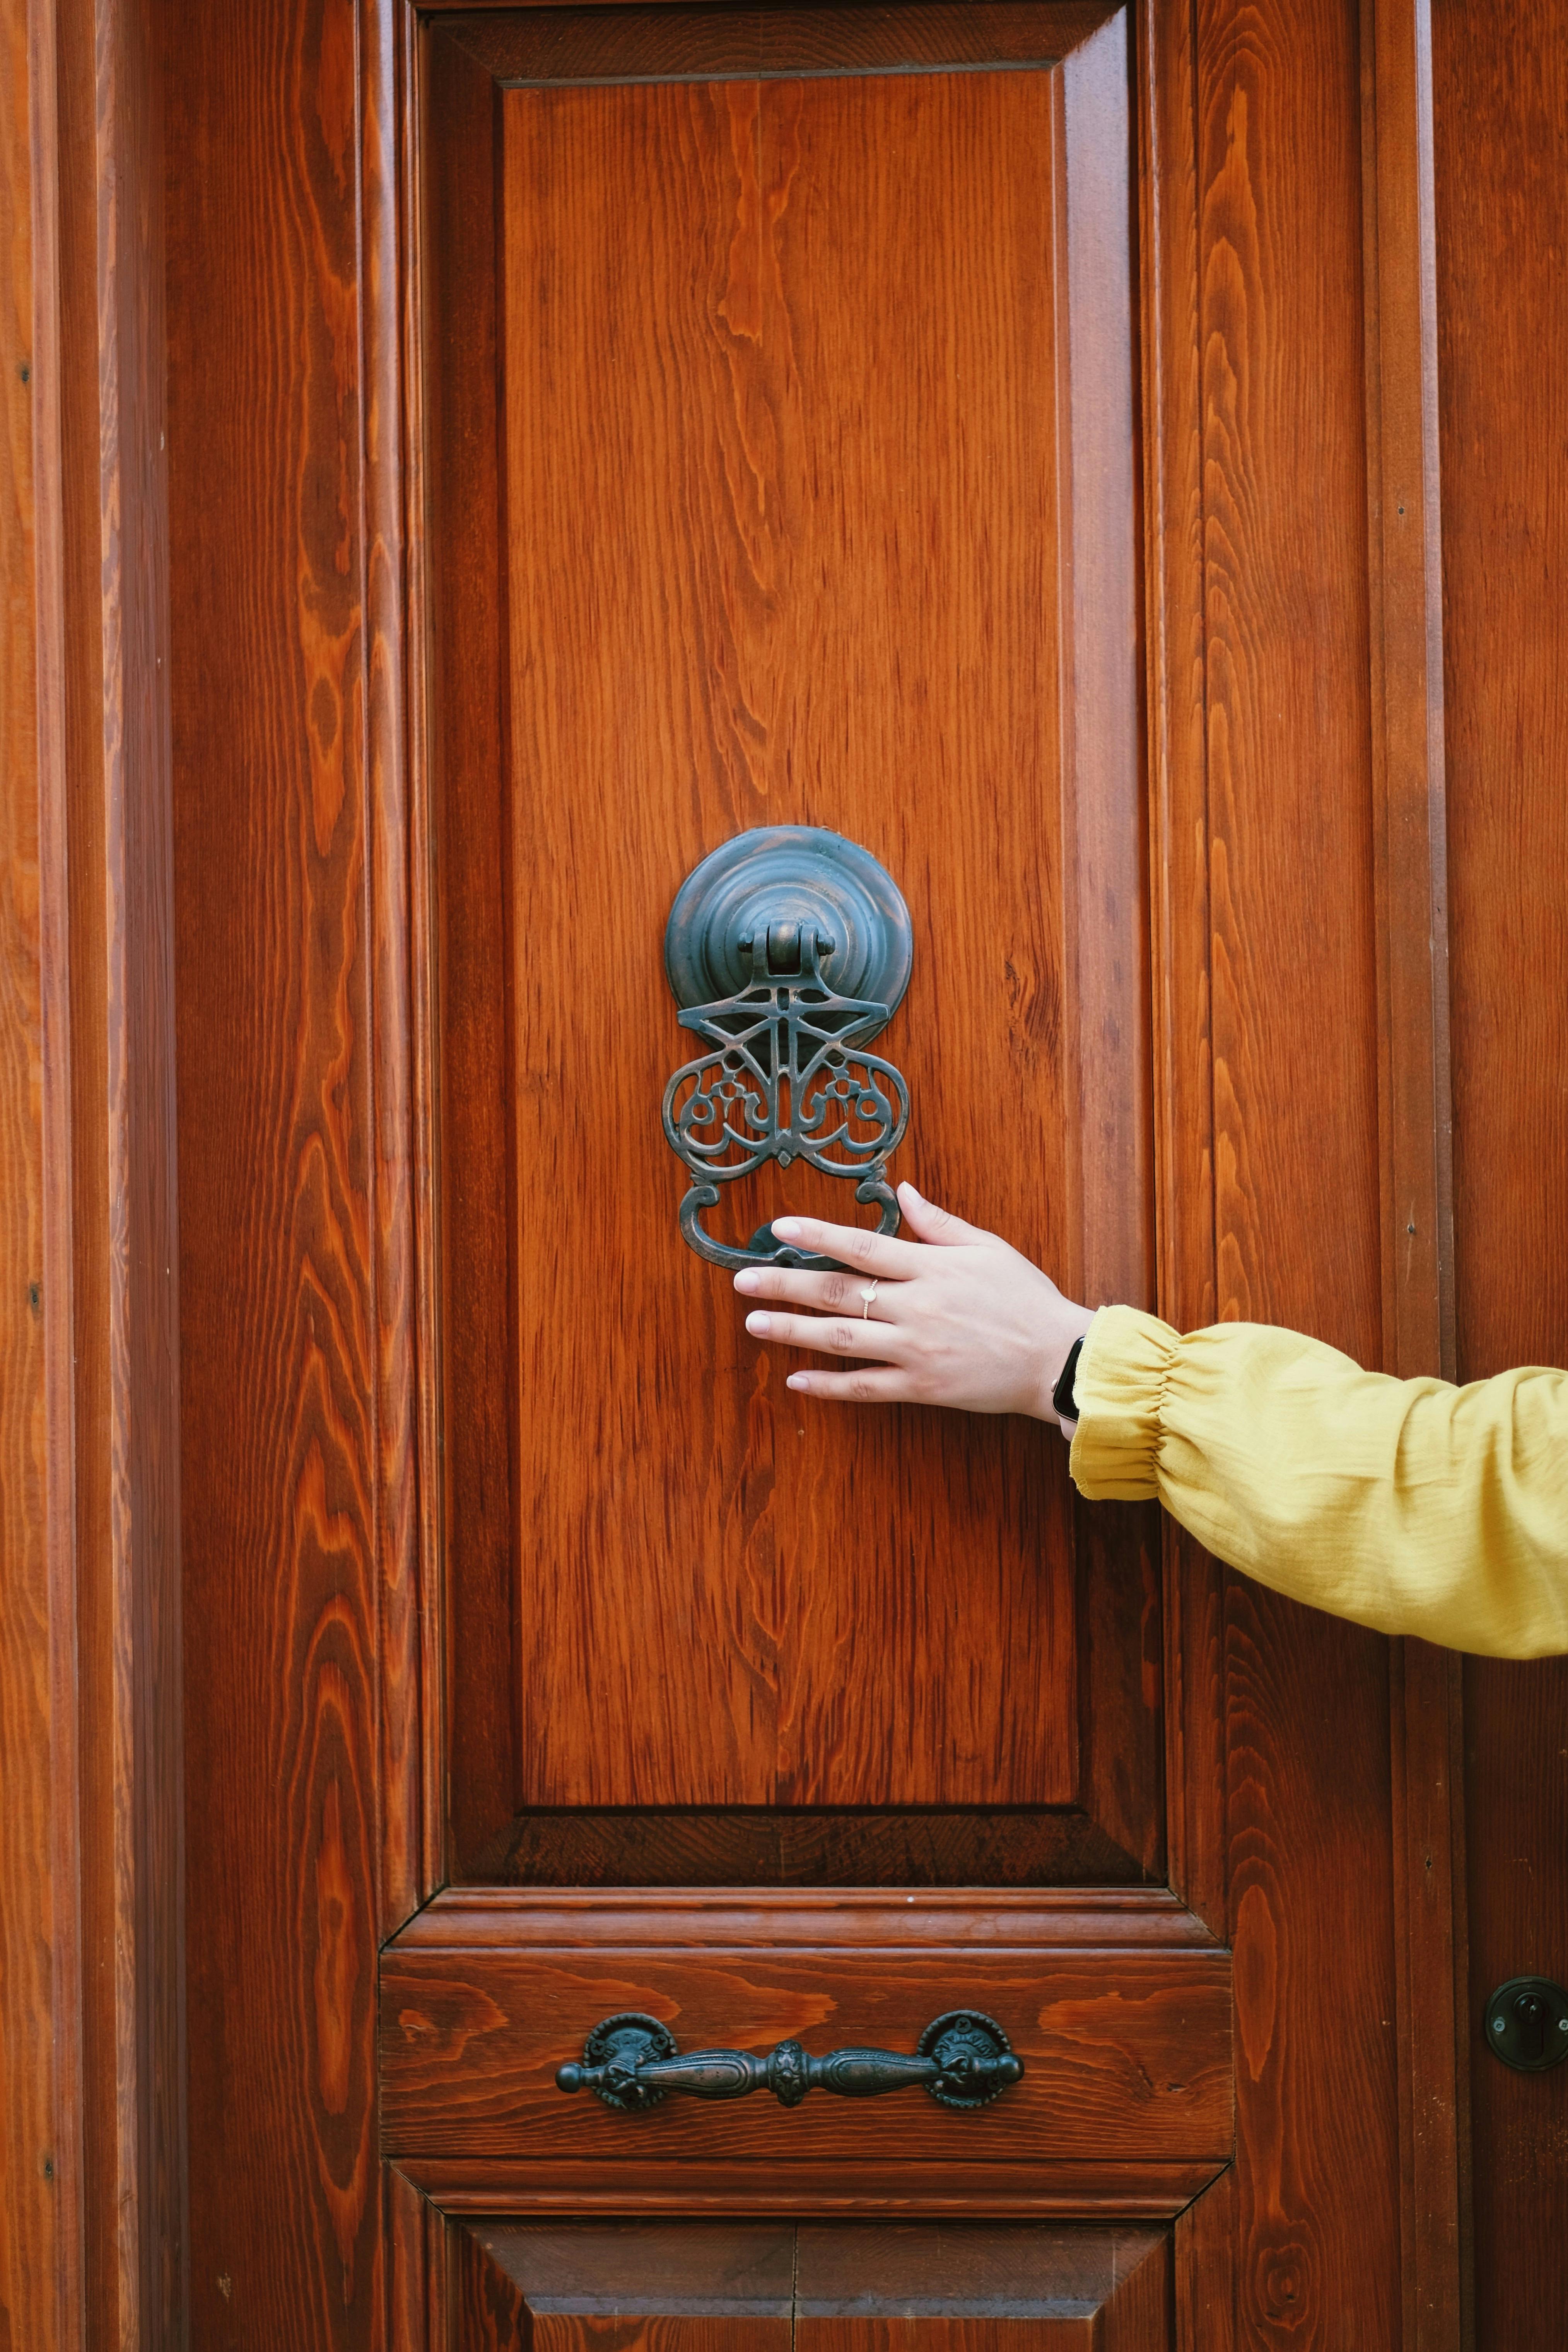 A man knocks on a door. For illustration purposes only | Source: Pexels